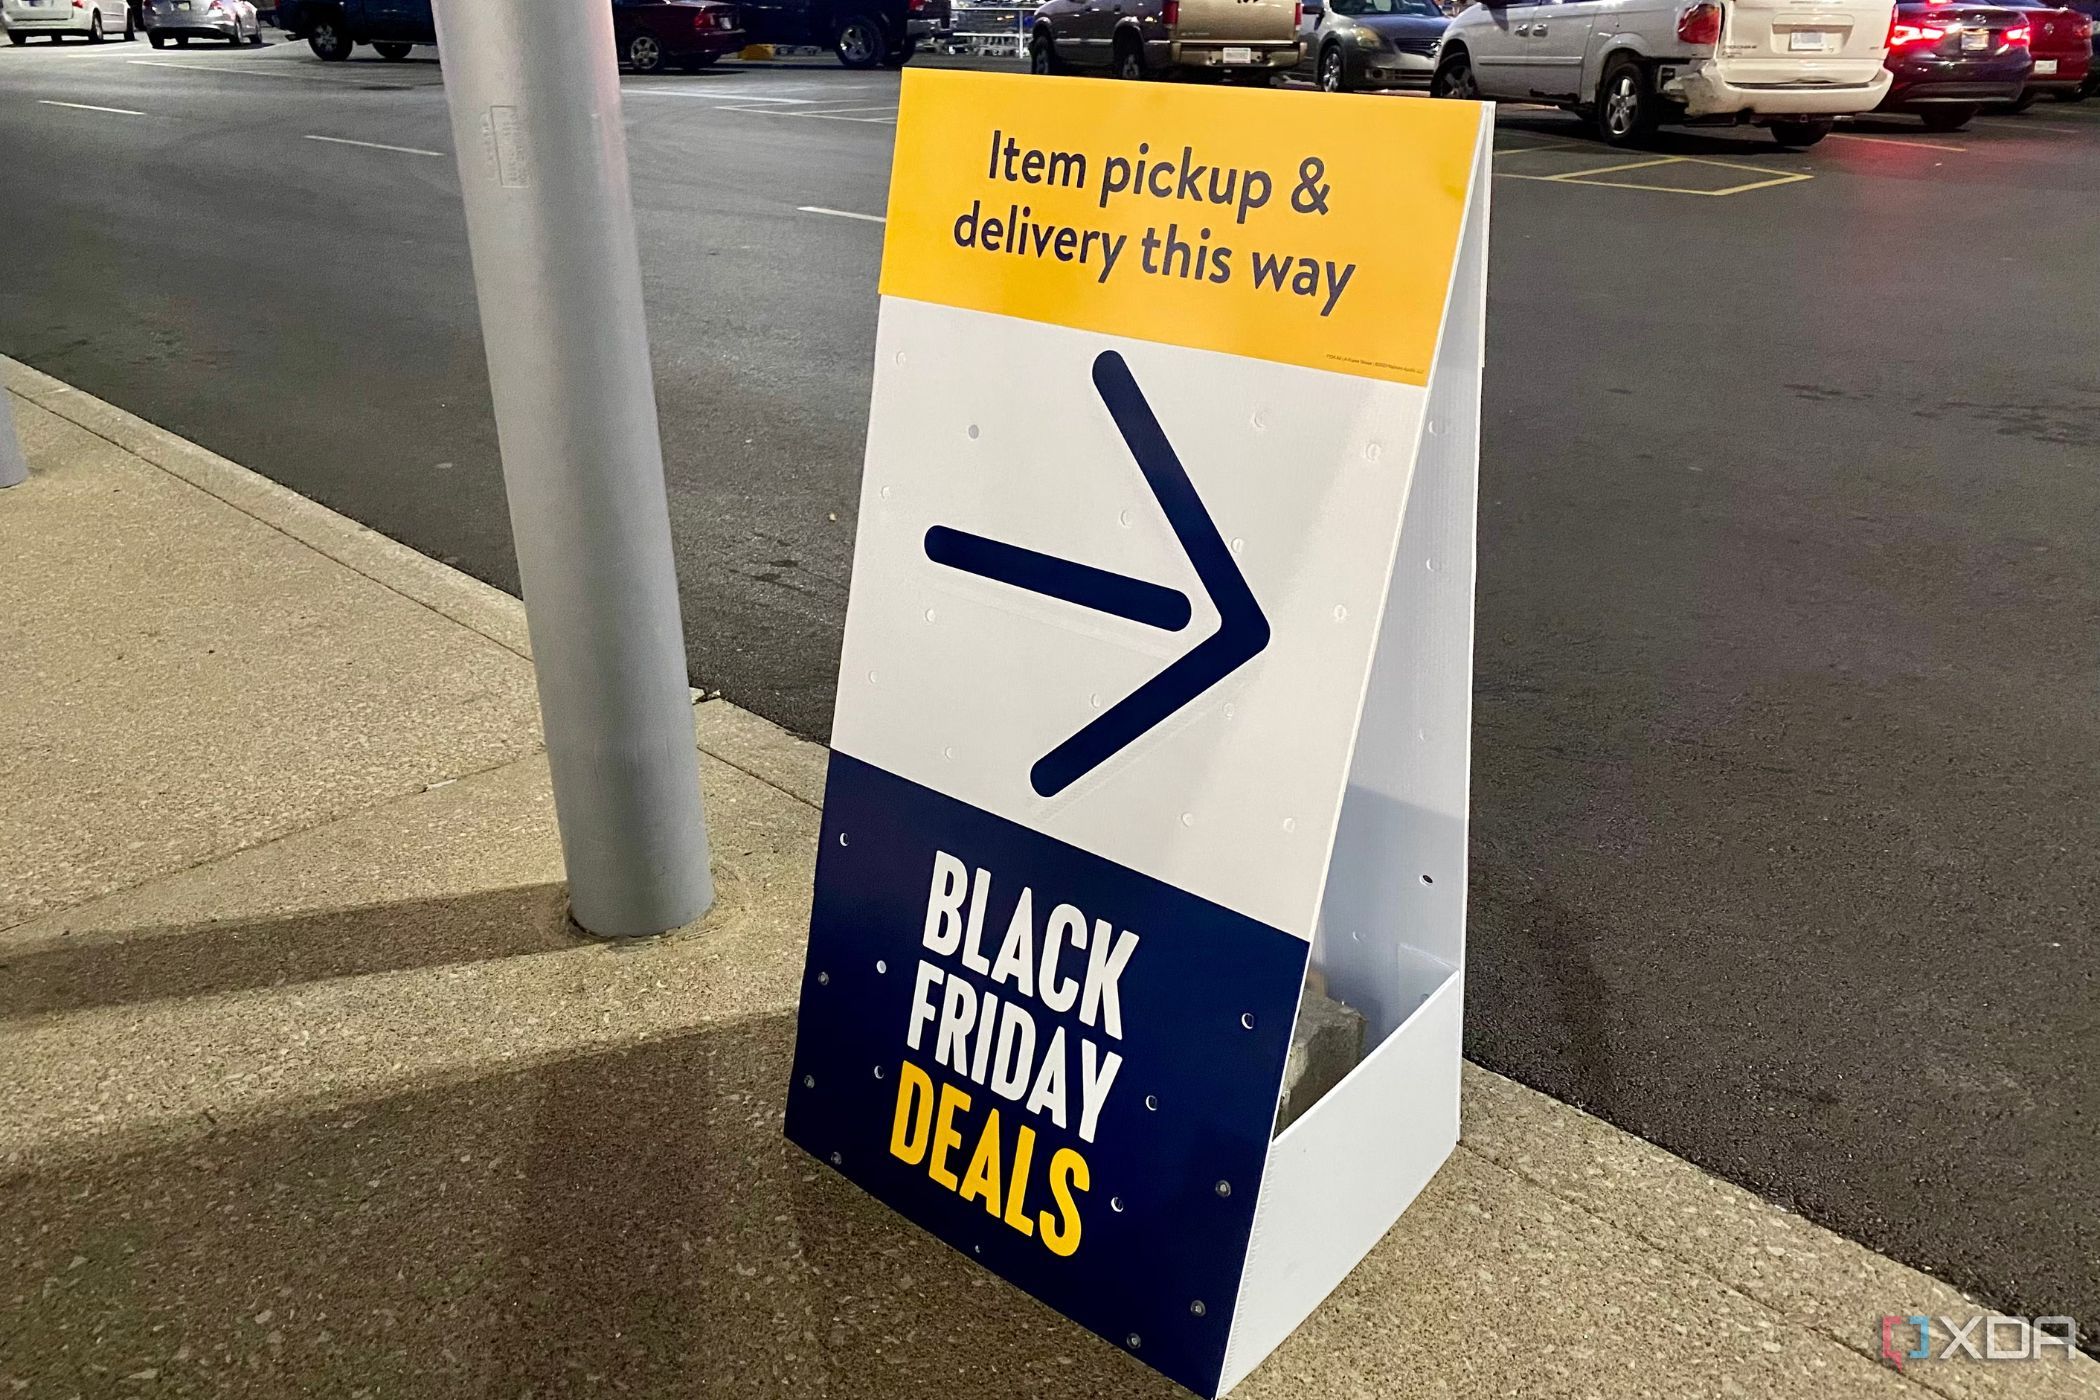 An image showing a Black Friday deals sinage in a parking lot.